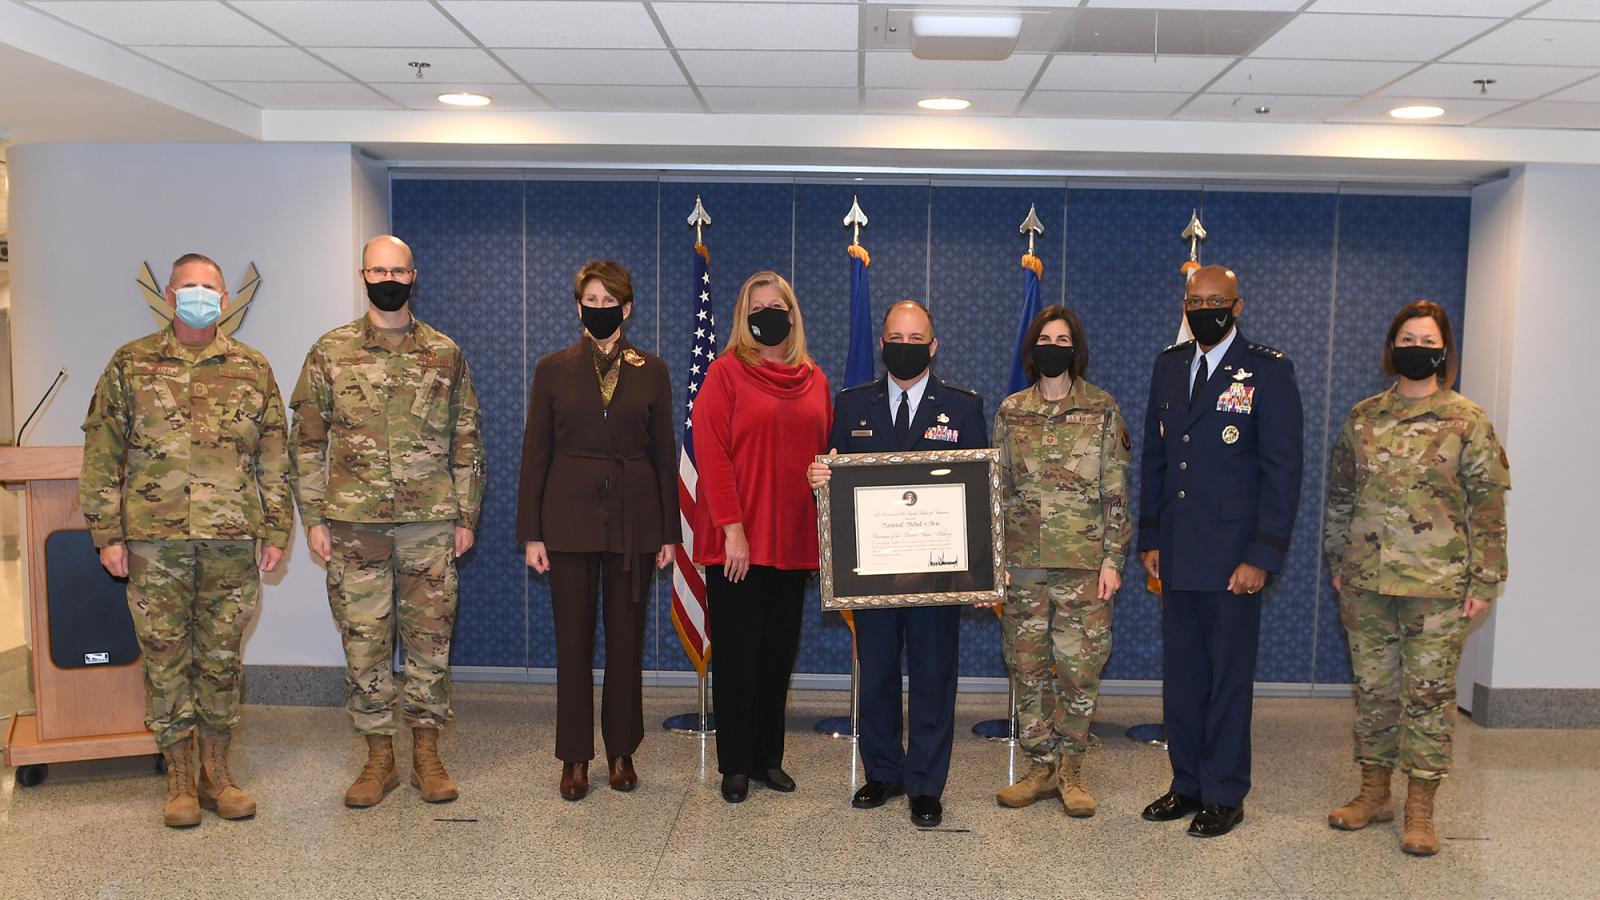 Woman standing with military service members, all wearing masks. 